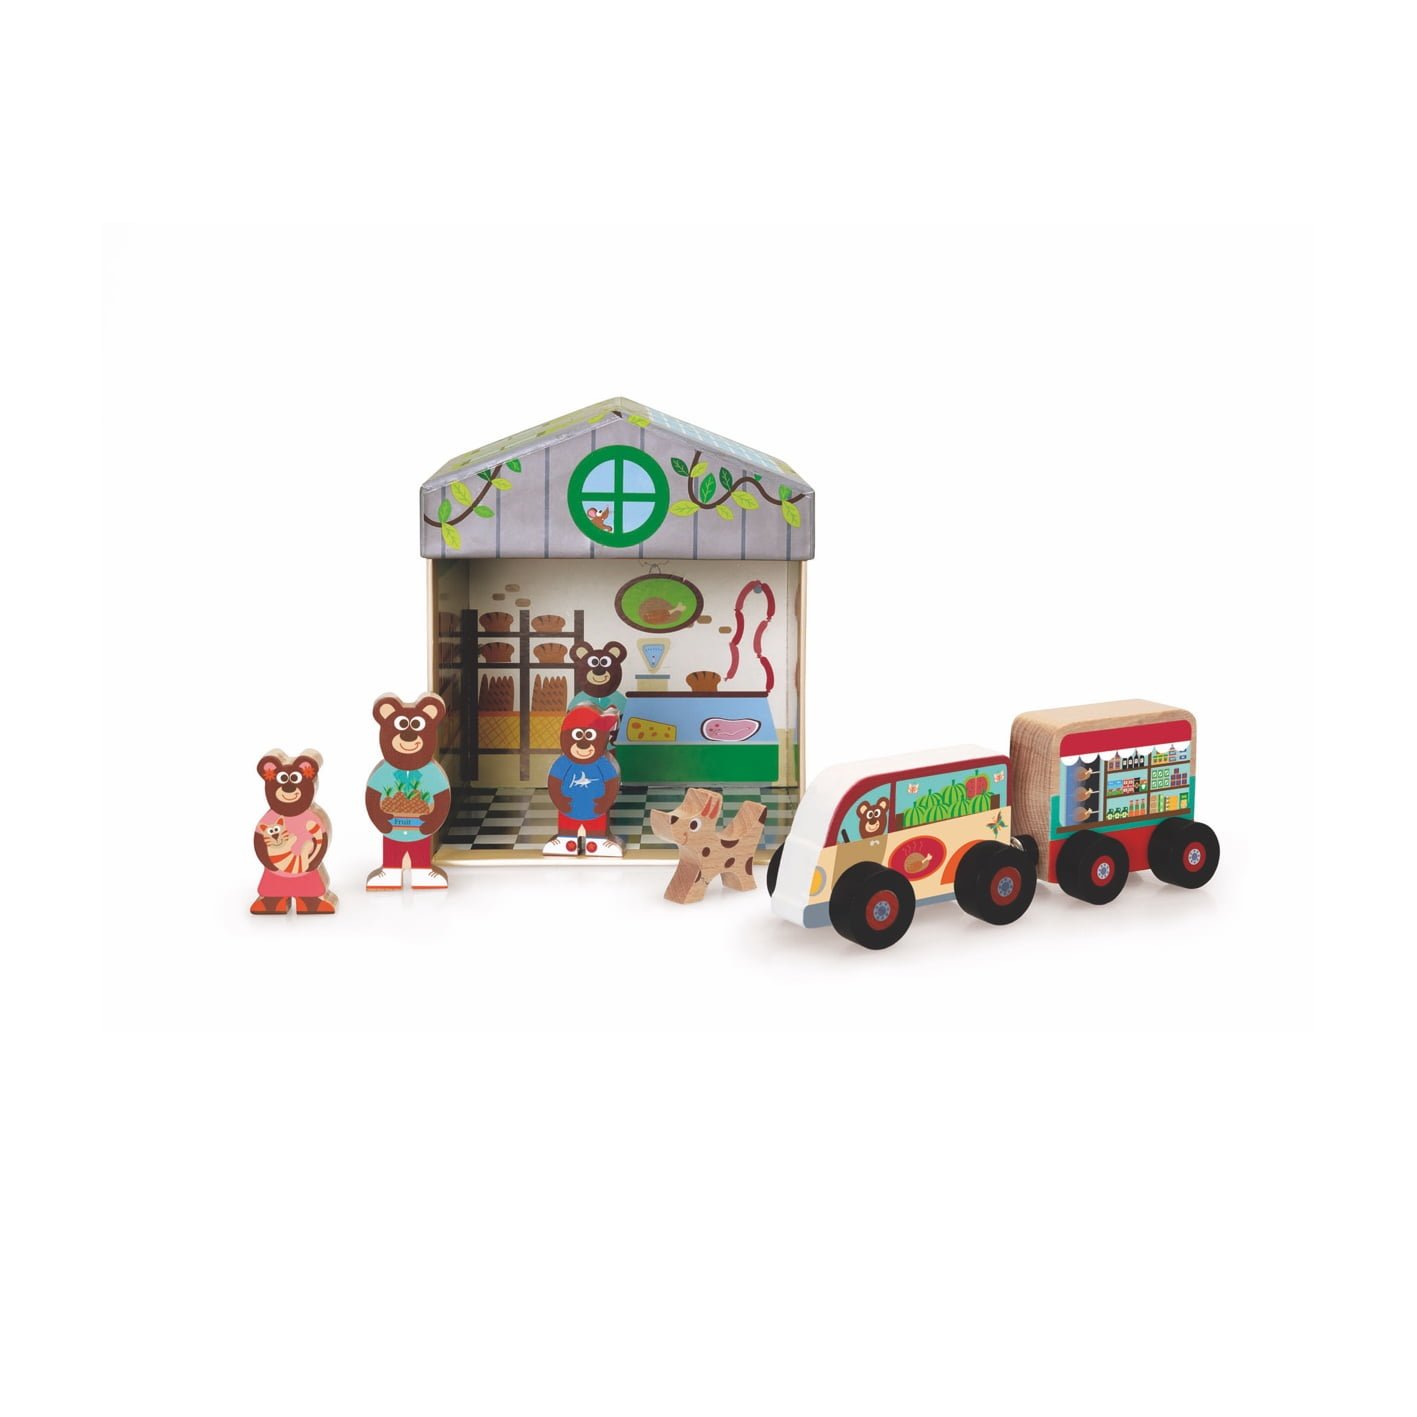 Scratch Playbox - Fruit and vegetable shop